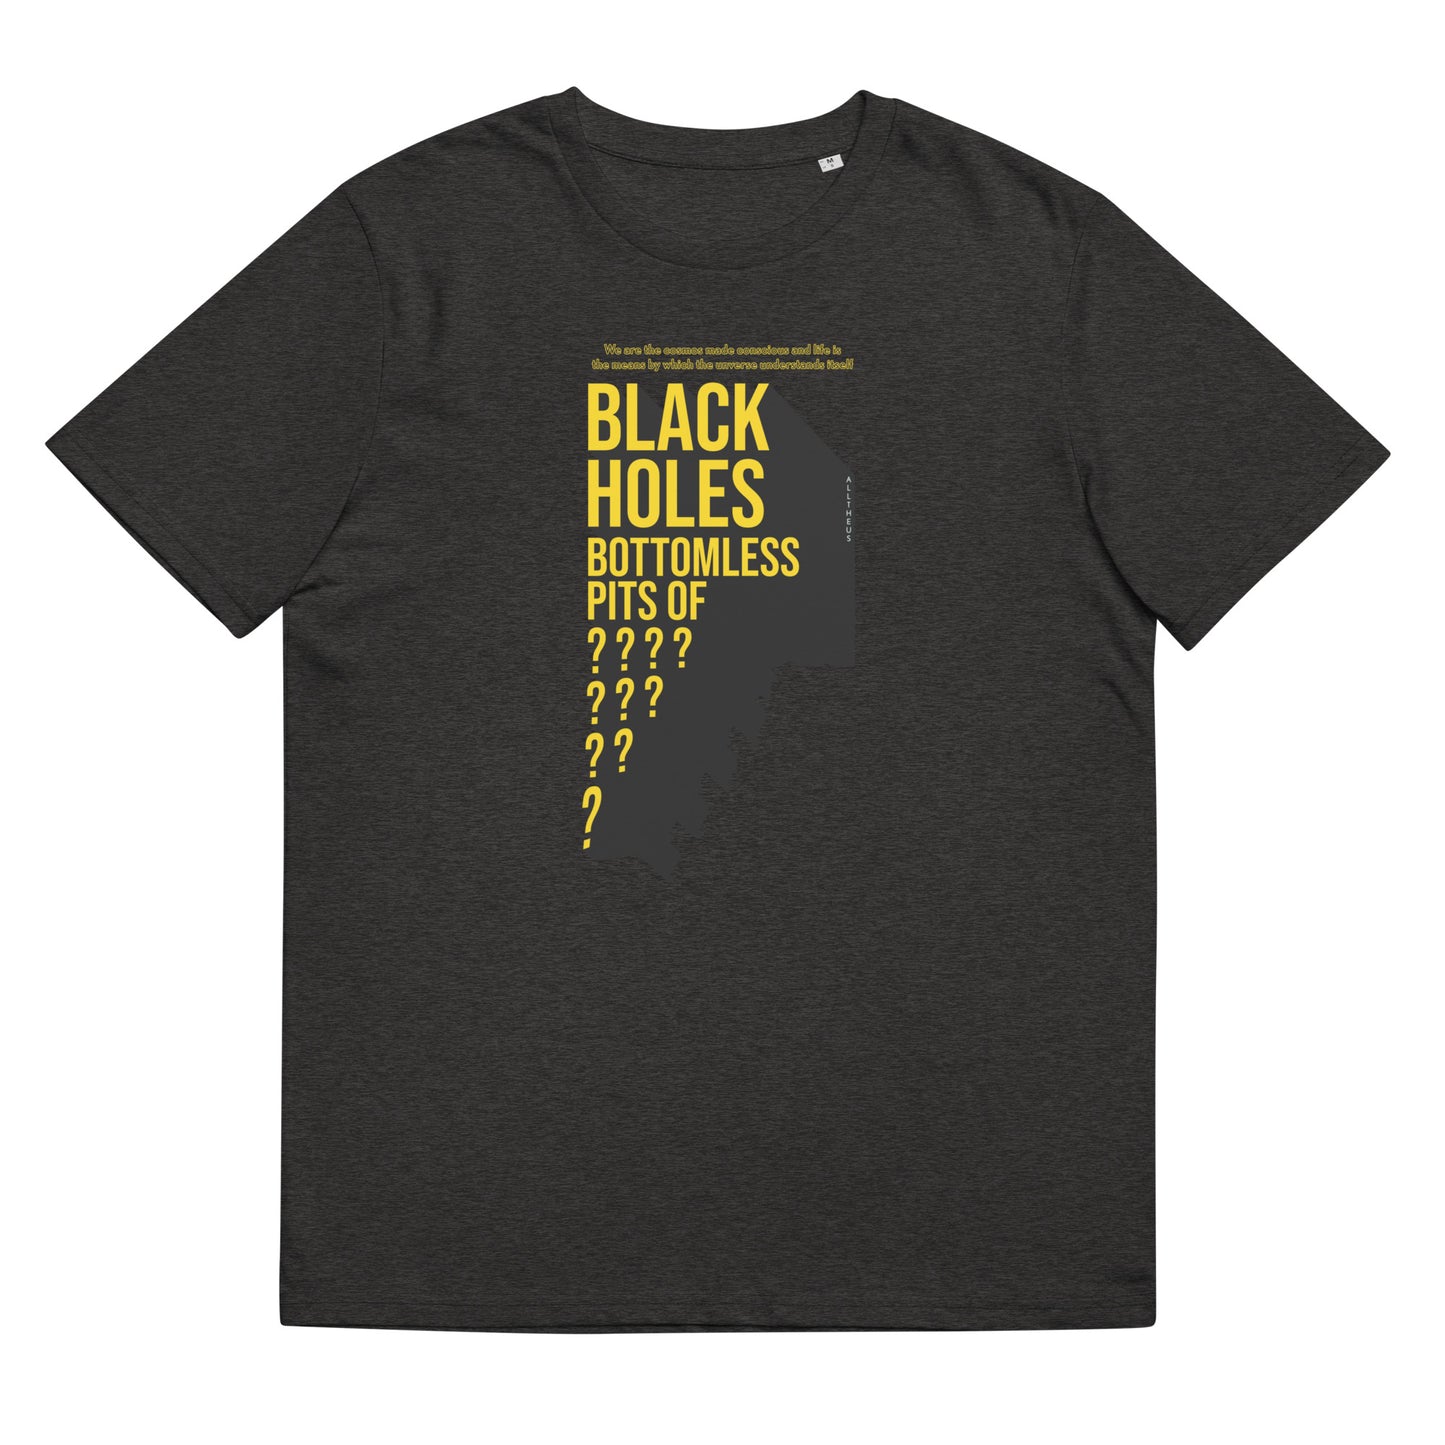 Unisex organic cotton t-shirt - Black Holes, Bottomless Pits Of Questions?